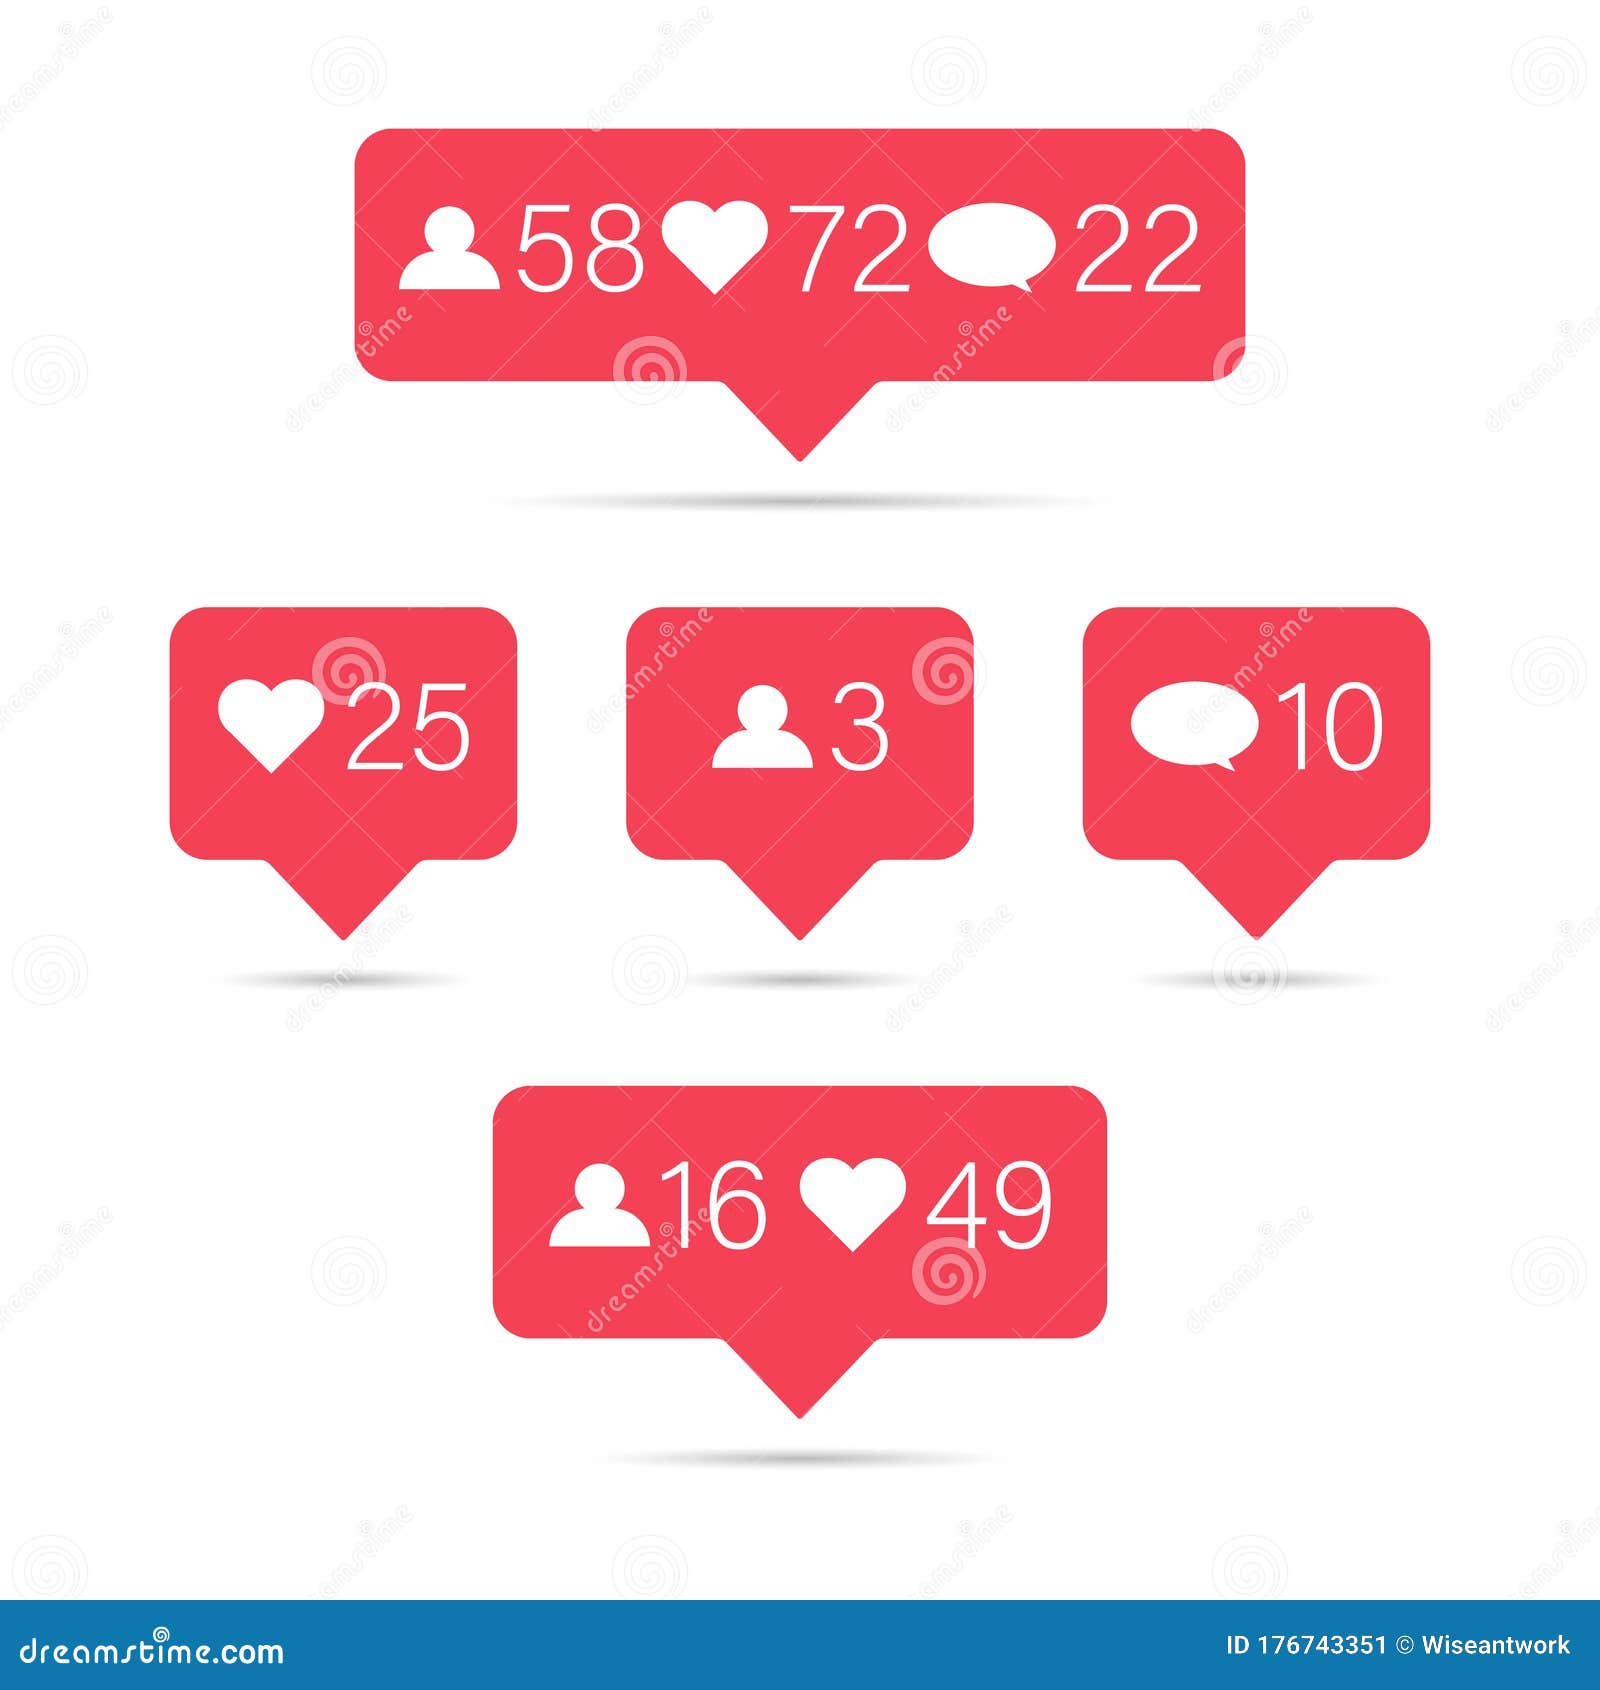 Red Social Media Notifications Icons For Web Design Social Net Tag